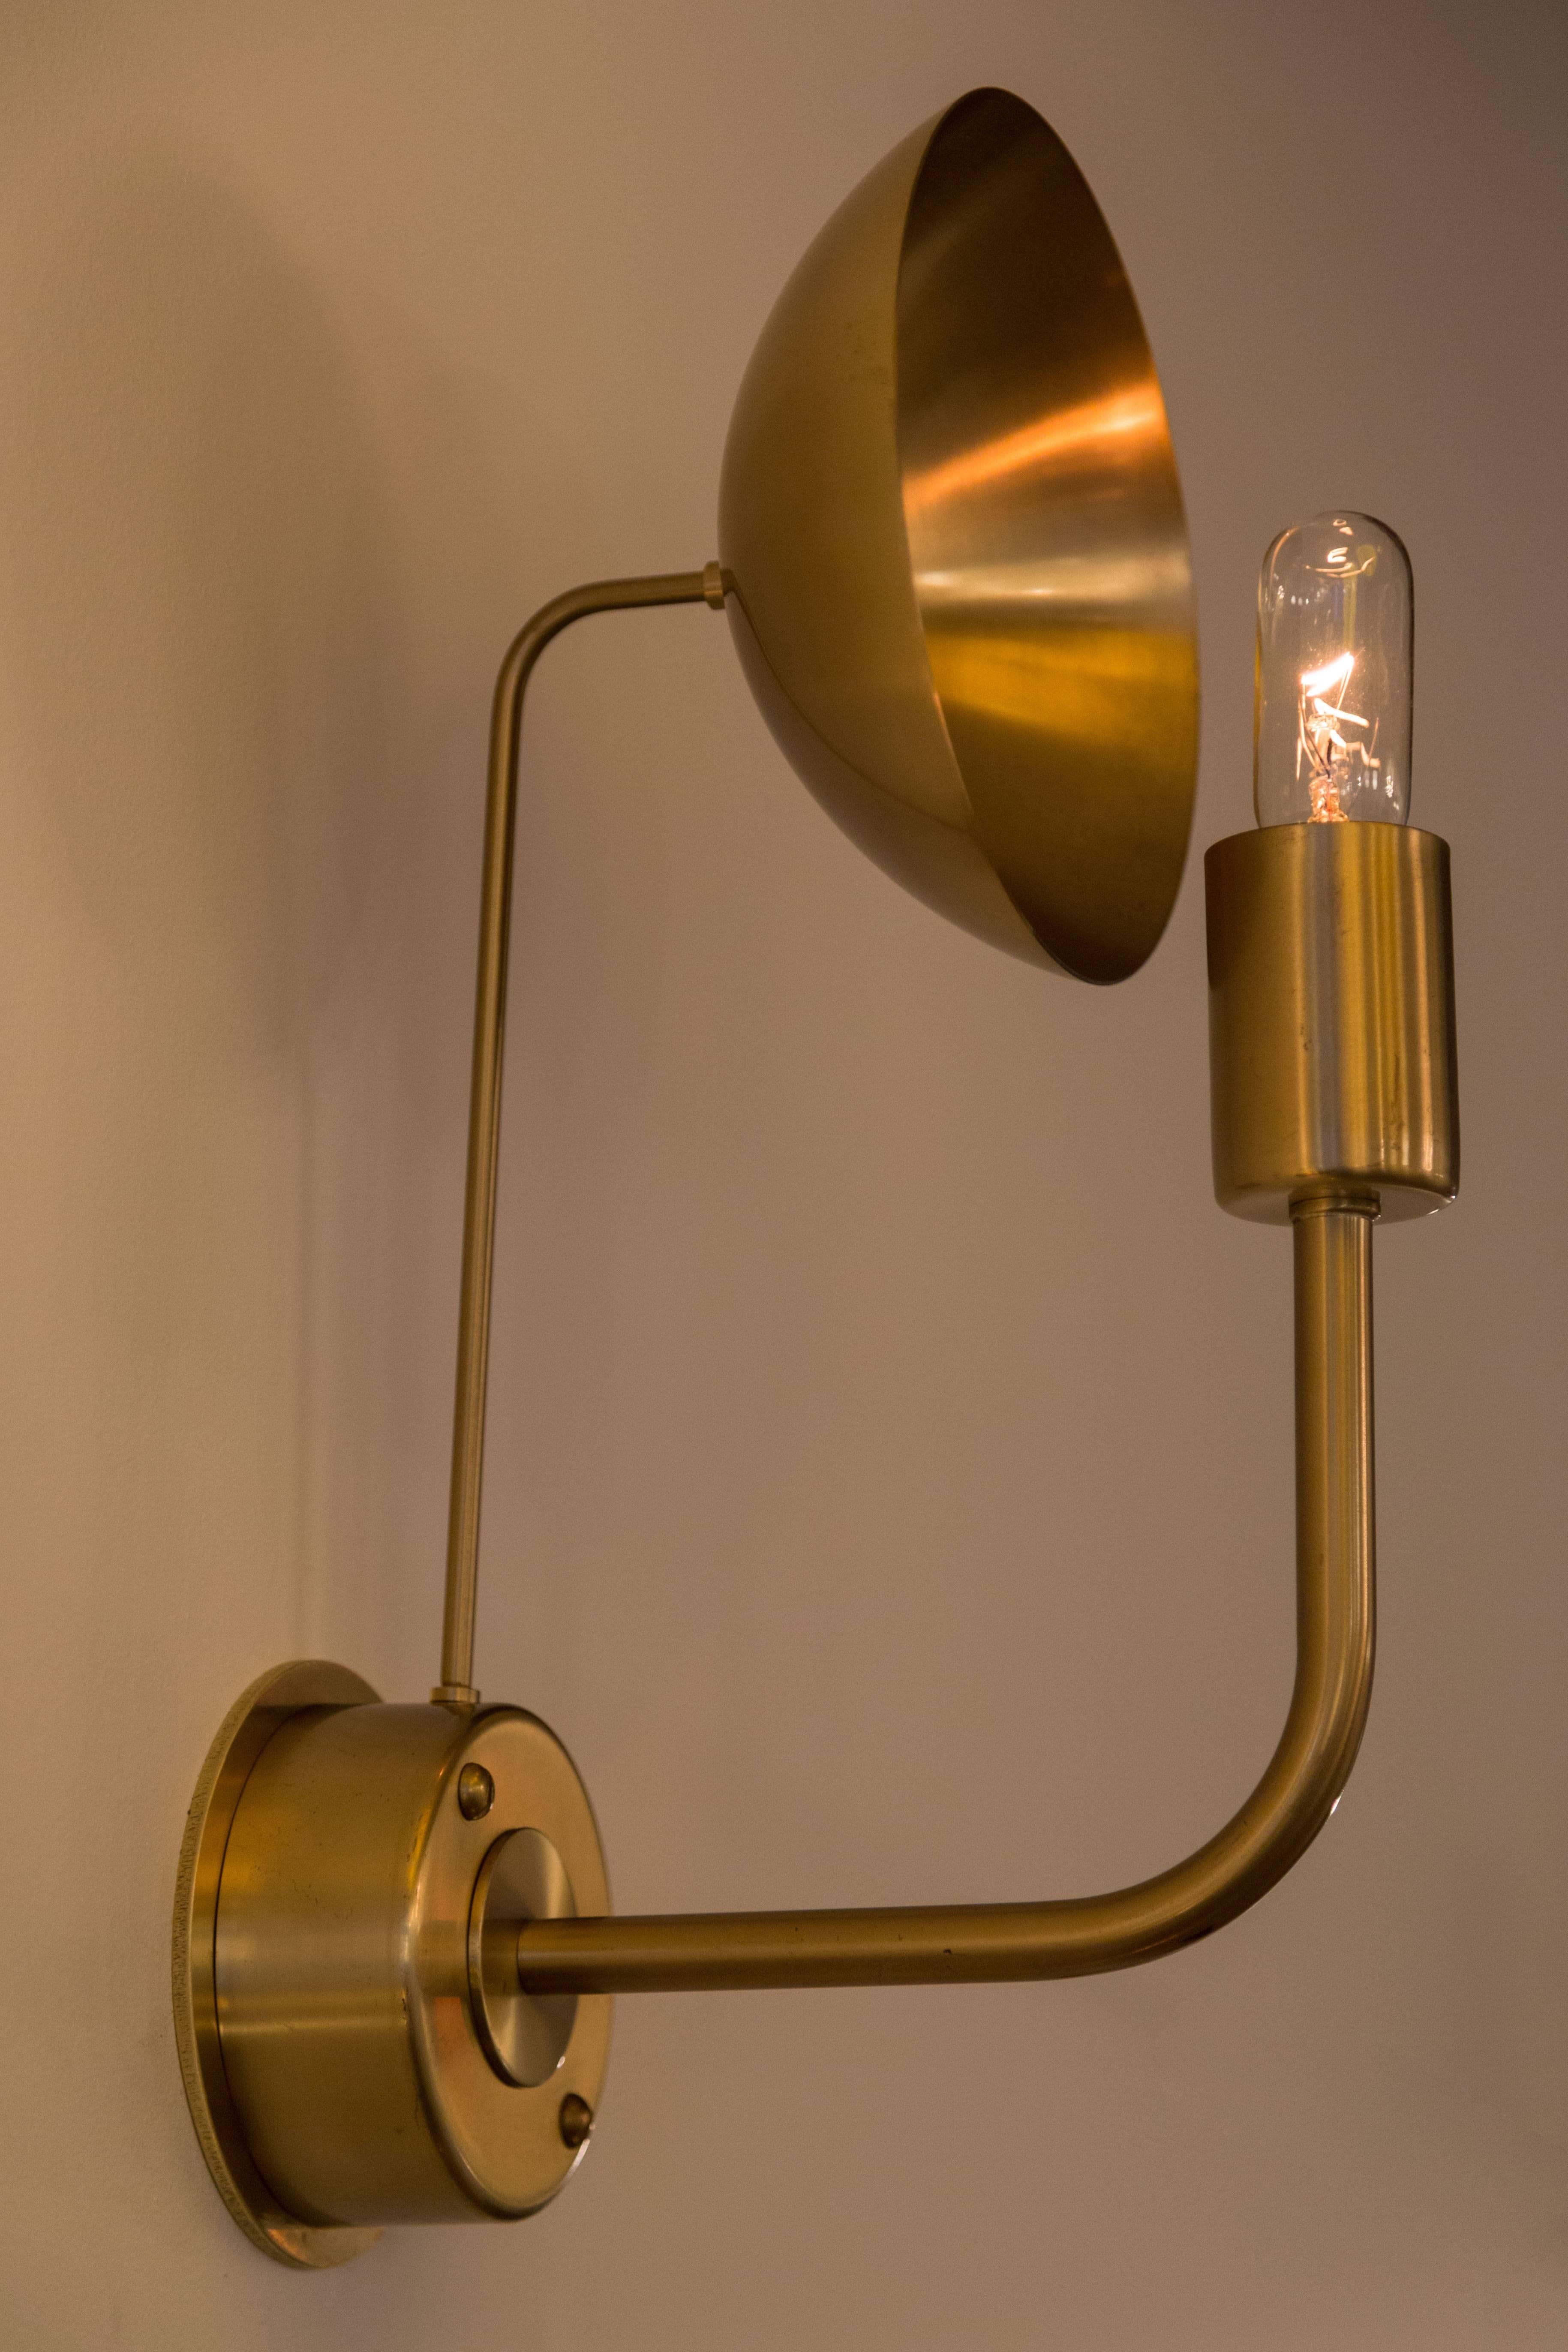 Brass sconces by Hans Agne Jakobsson. Brass reflector illuminated by the base fixture and bulb. Base stem uses a single 25w E14 candelabra bulb. Rewired. Sold individually and priced individually.